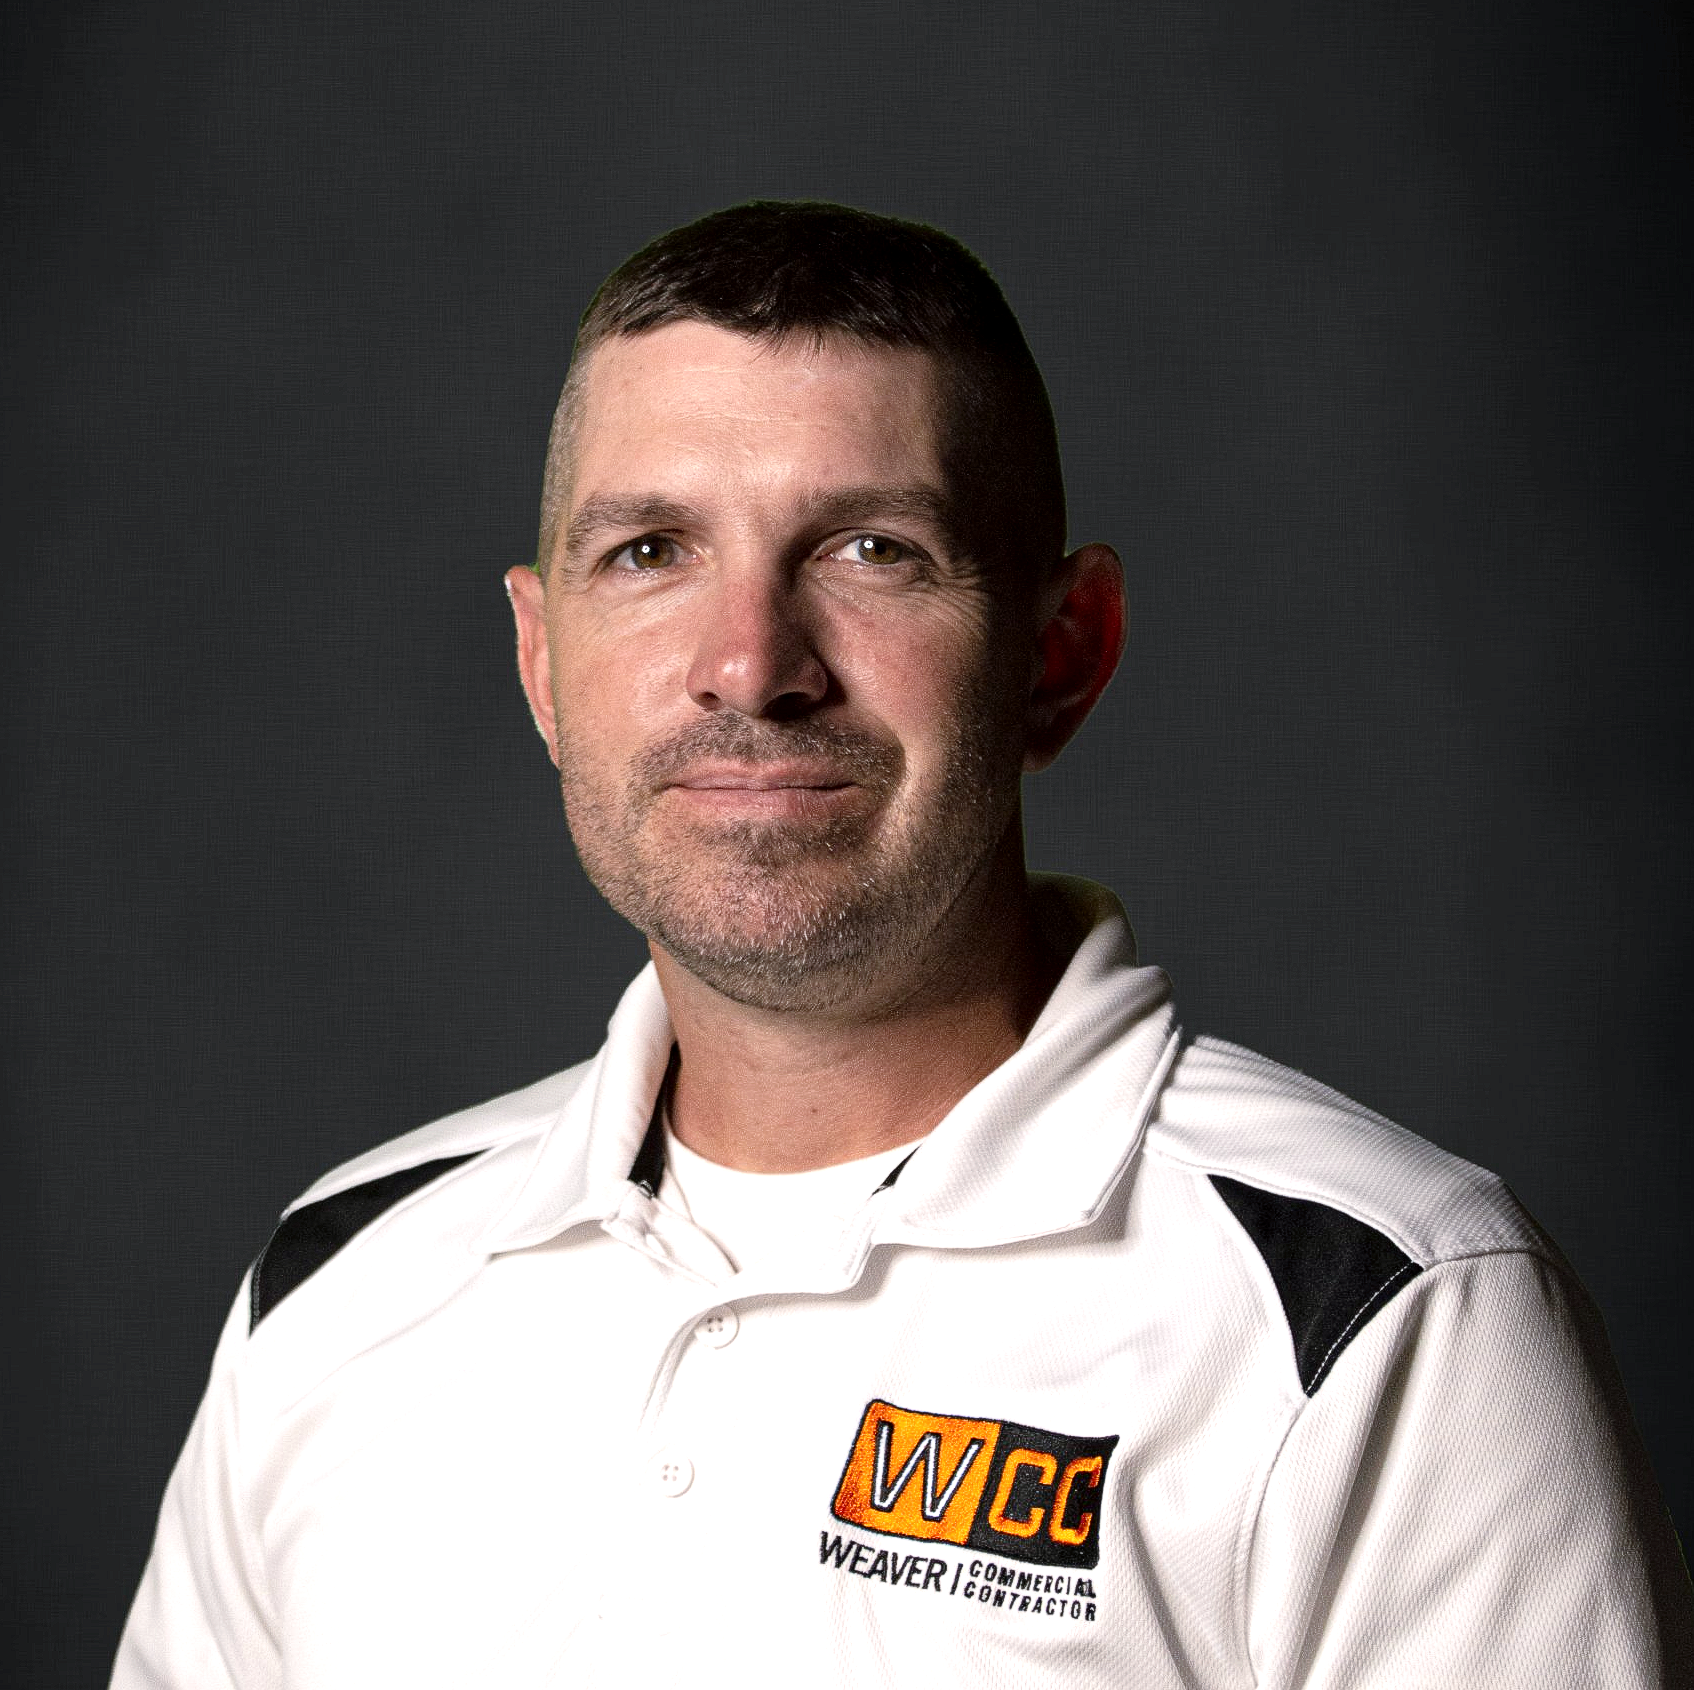 Steve Yoder - Project Manager at Weaver CC